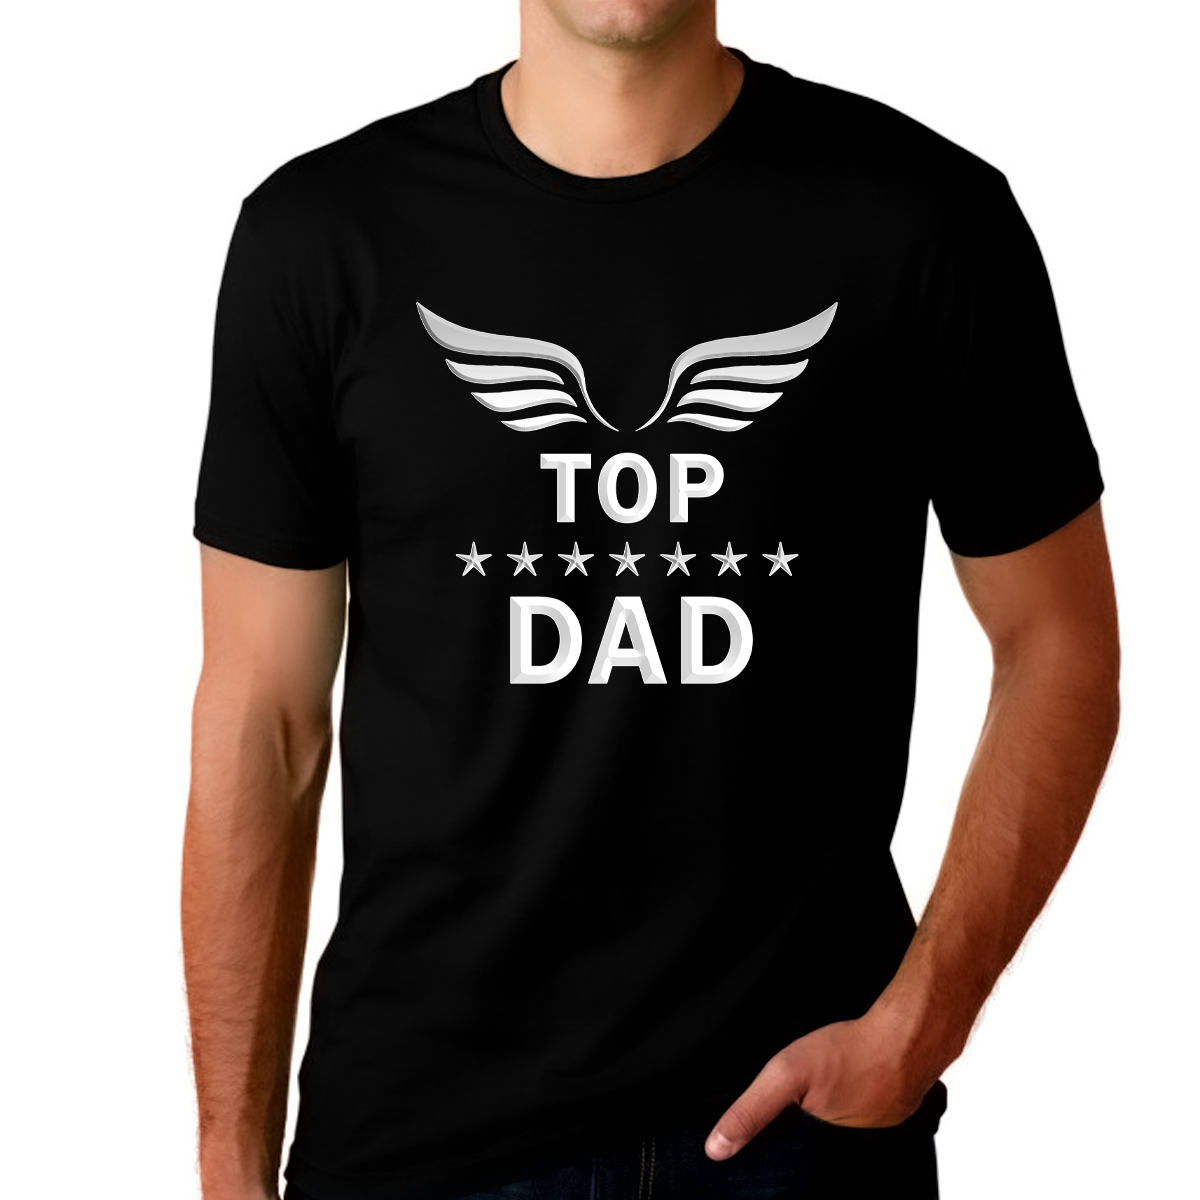 Fathers Day Shirts for Men - Top Dad Shirt - Fathers Day Gifts - Fathers Day Funny Dad Shirts Black / S